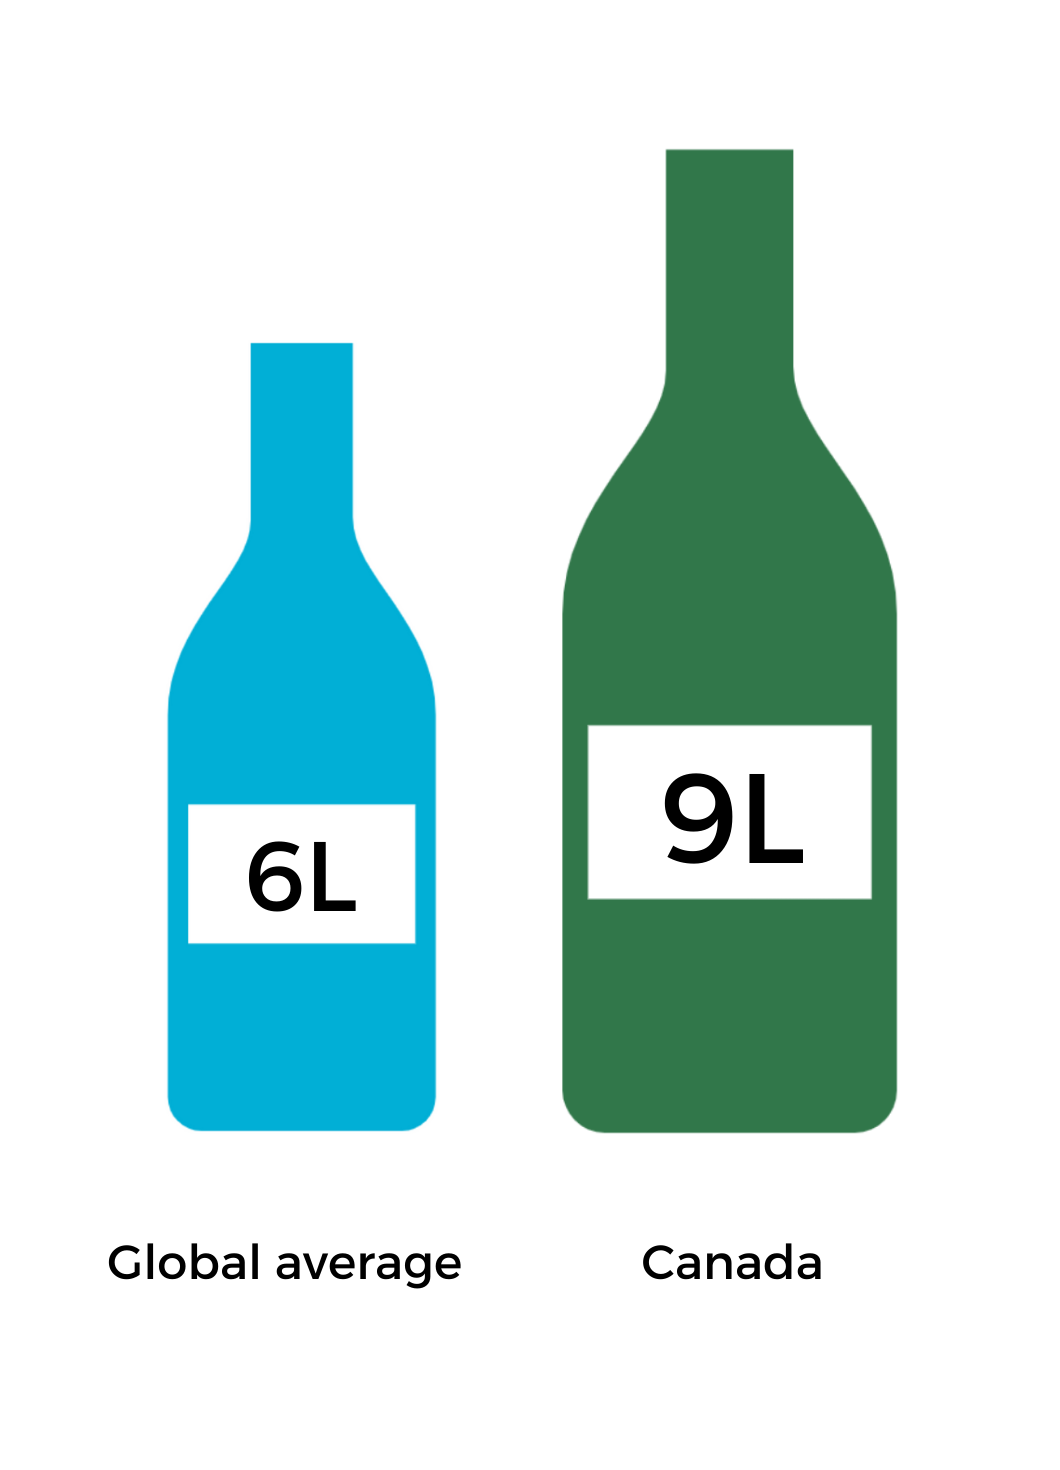 6 L per year is global average per capita and 9 L is Canadian per capita rate of alcohol consumption